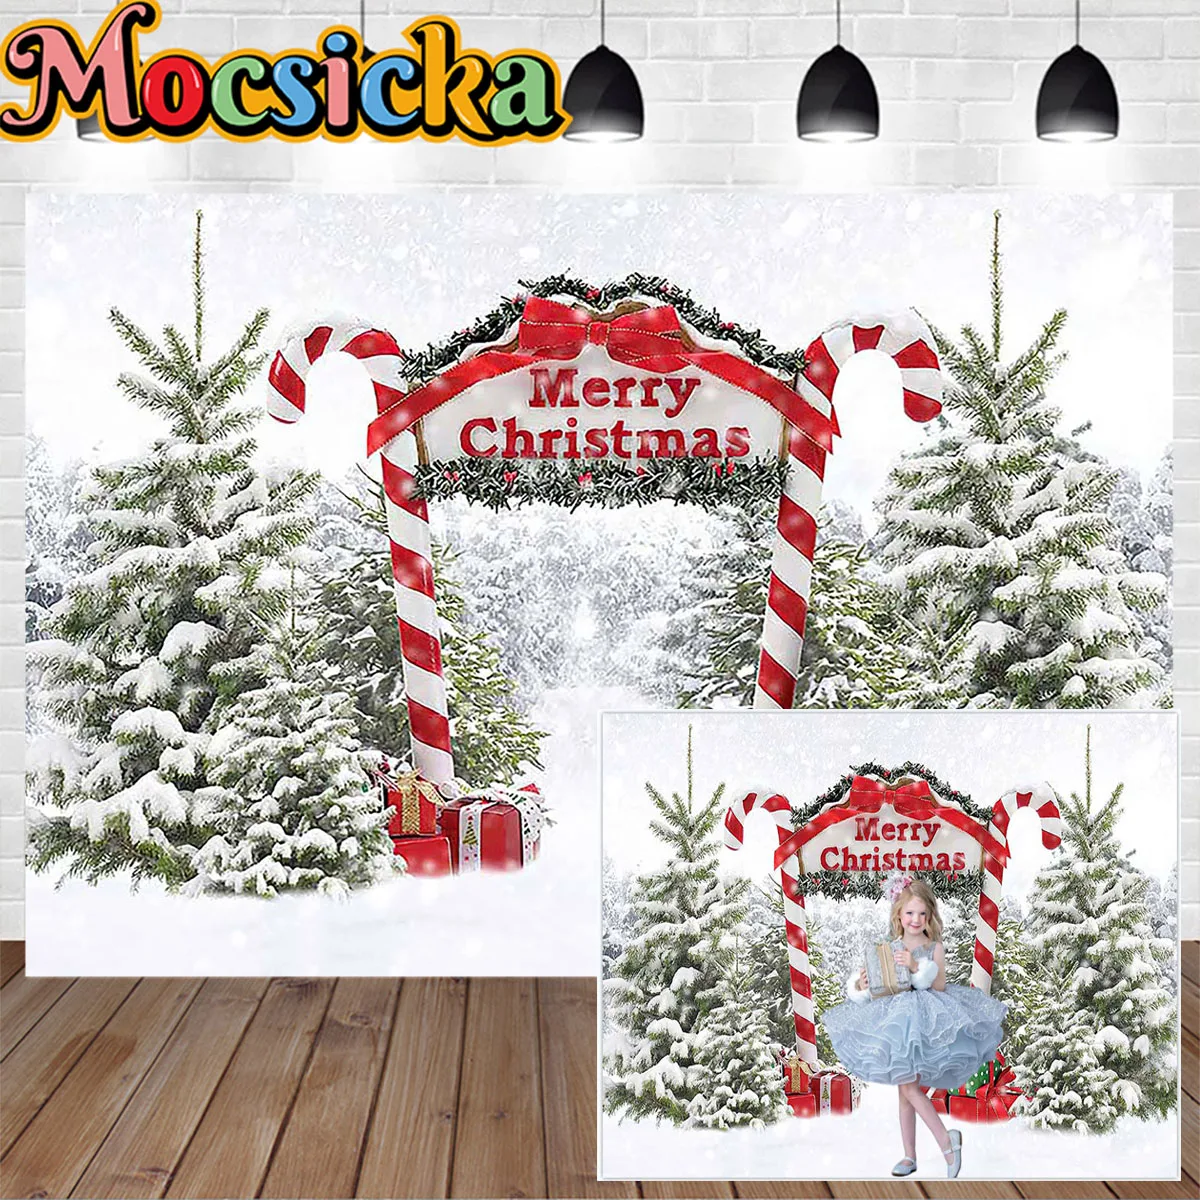 

Merry Christmas Photography Background Winter Candy Cane Gift Decor Door Xmas Tree Forest Snowflakes Backdrop Kids Studio Photo